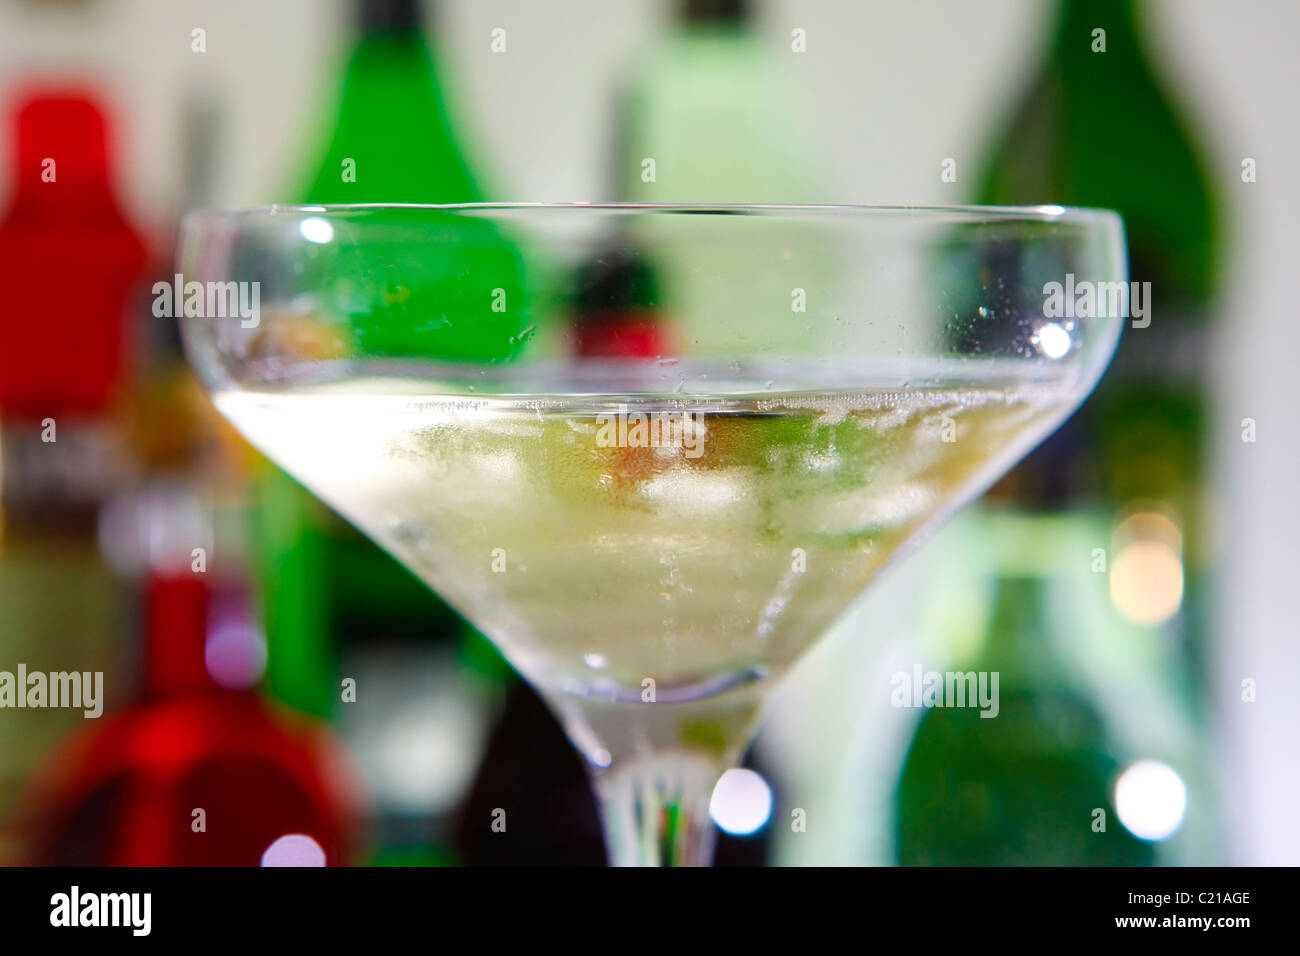 Glass of champagne on a bar. Stock Photo